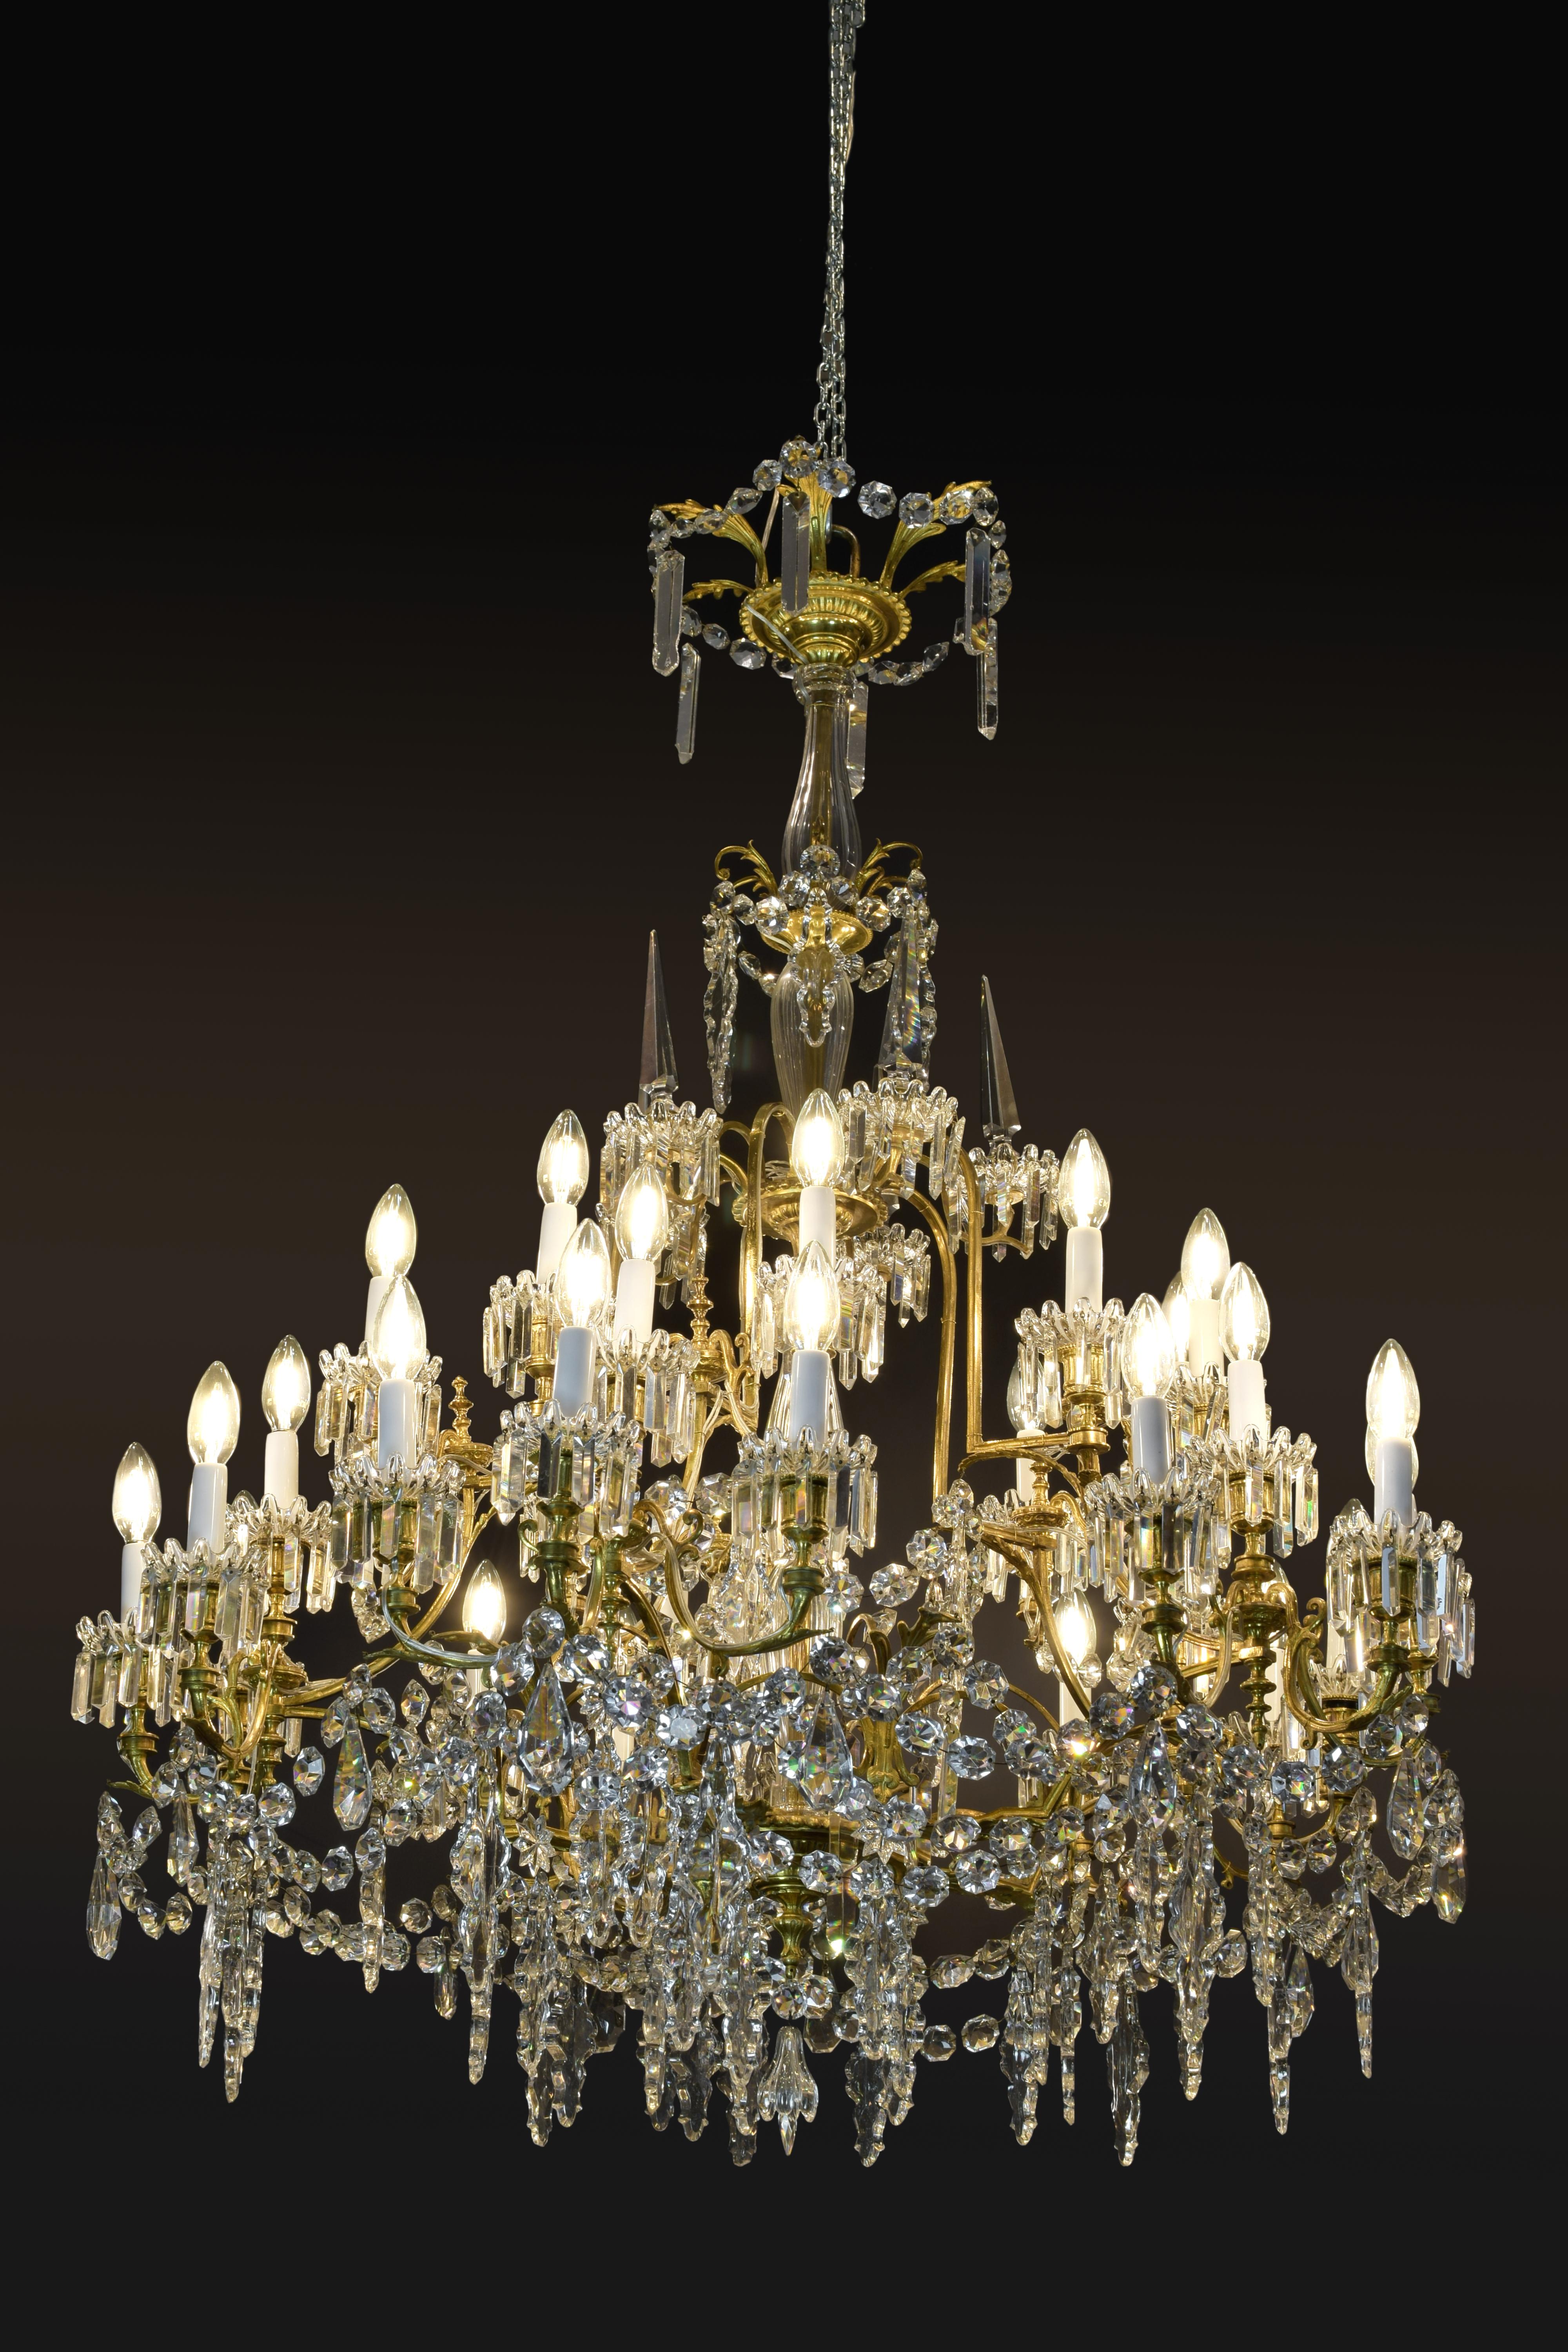 Thirty lights chandelier. Bronze and glass, late 19th century.
It is necessary to emphasize the variety of forms and the quality of the colorless glass. The profiles of some beads (tears, polygons, pinnacles) are found both in Bohemian and other